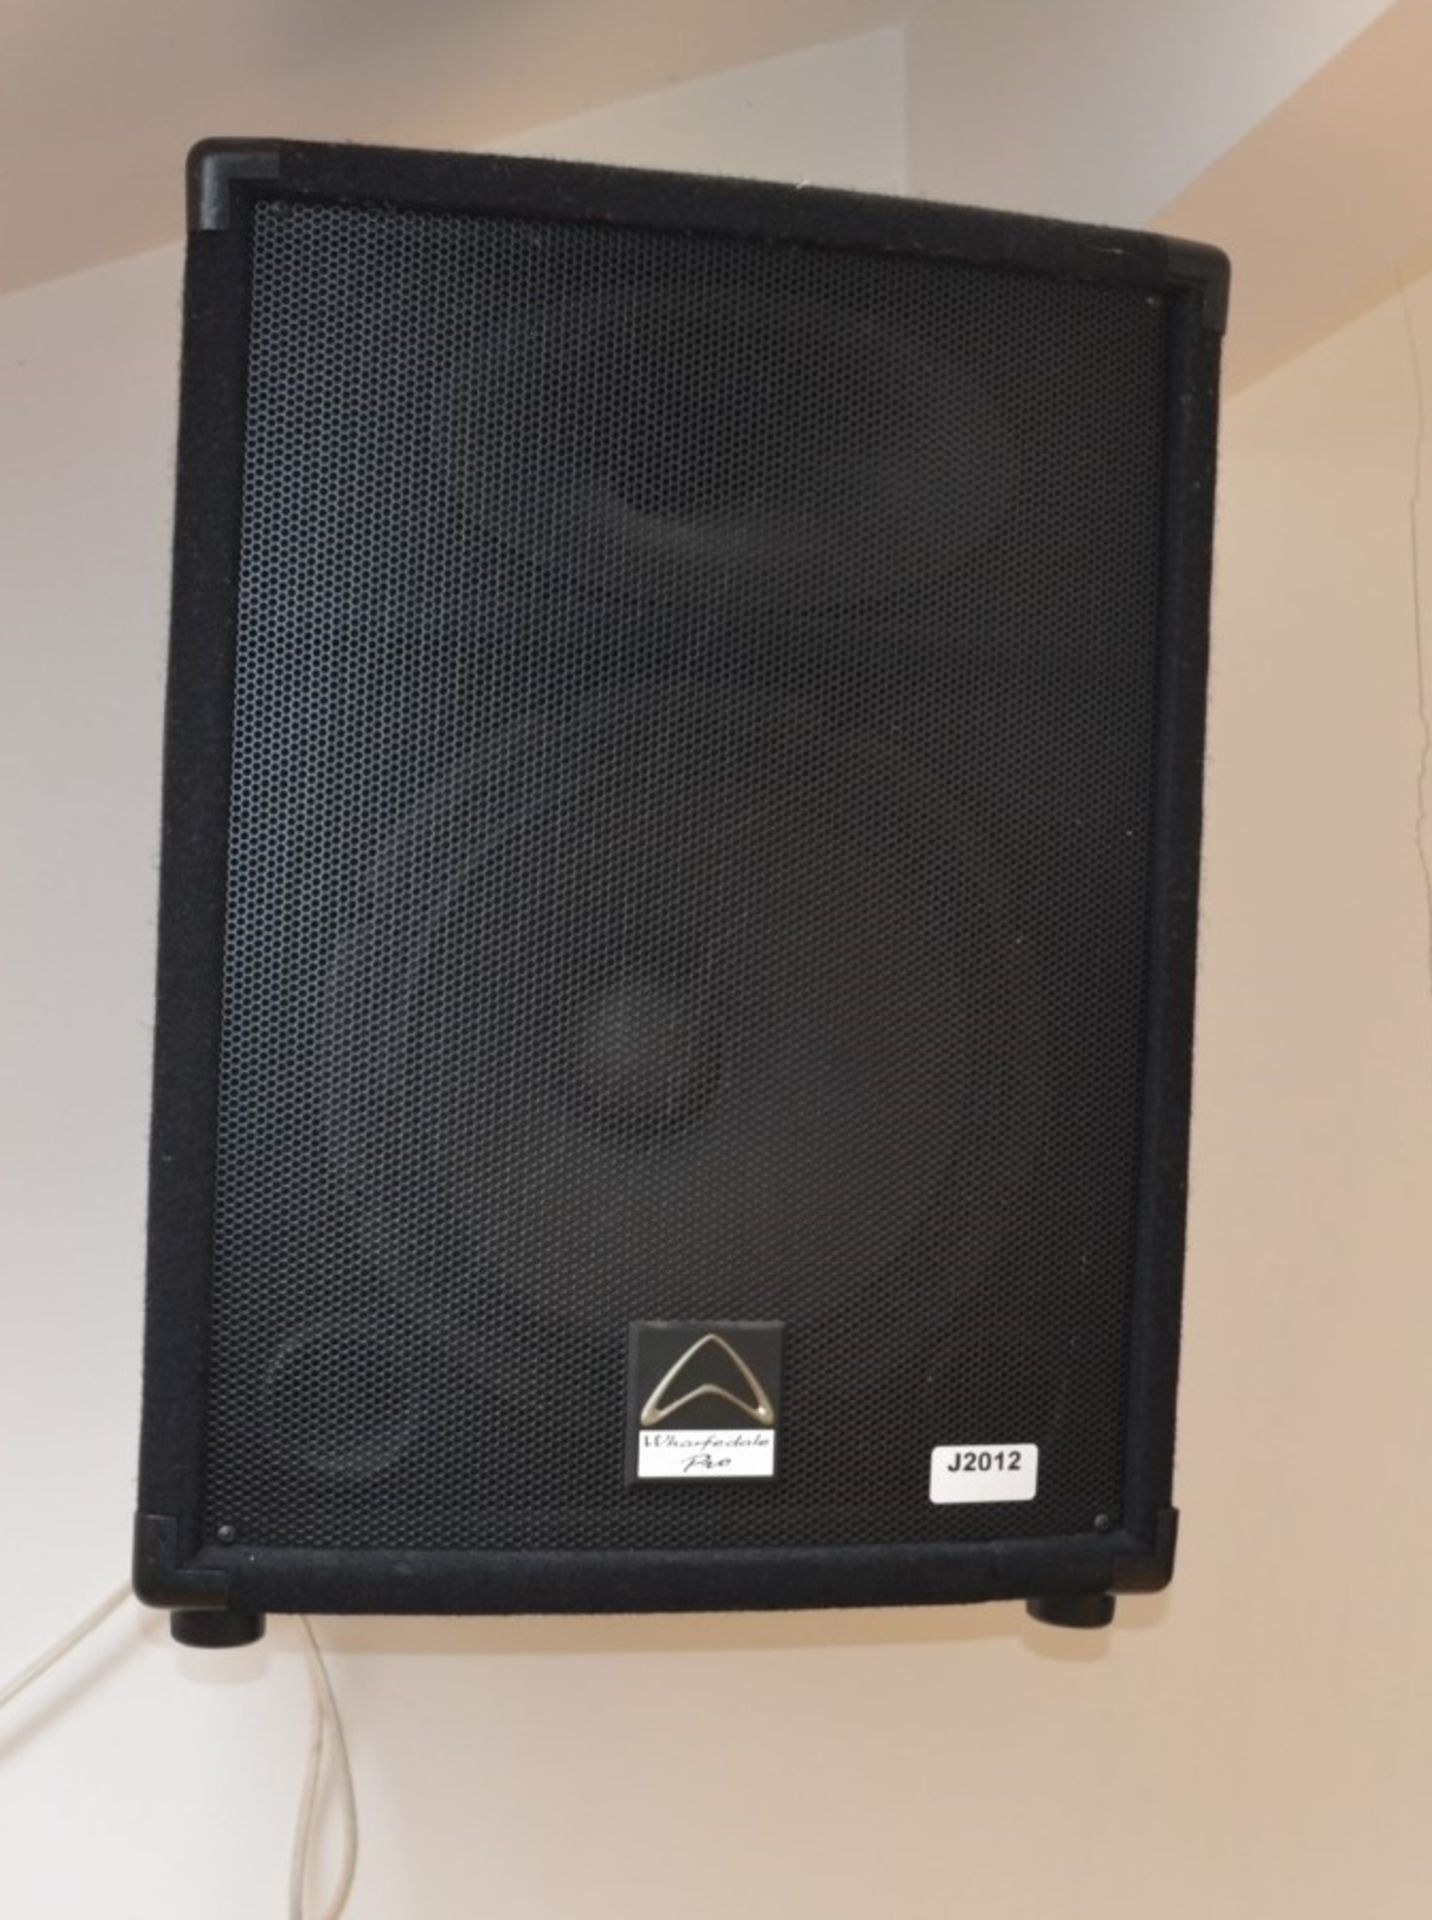 2 x Wharfedale Pro SVP PA Speakers With Wall Mounting Brackets - Image 4 of 4